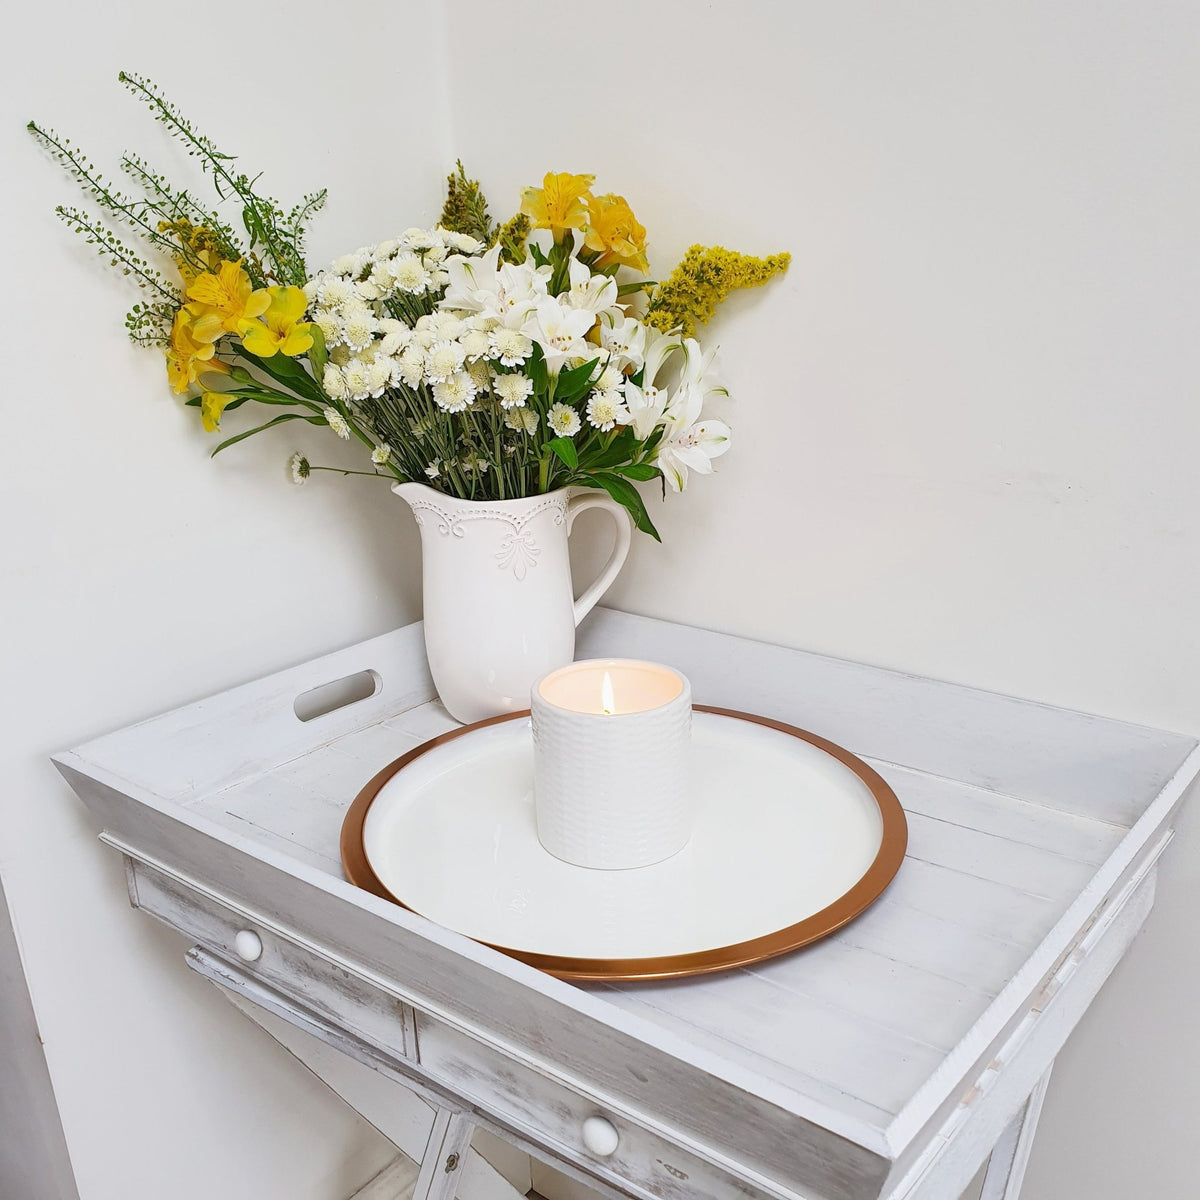 White and Copper Decorative Tray with yellow and white summer flowers